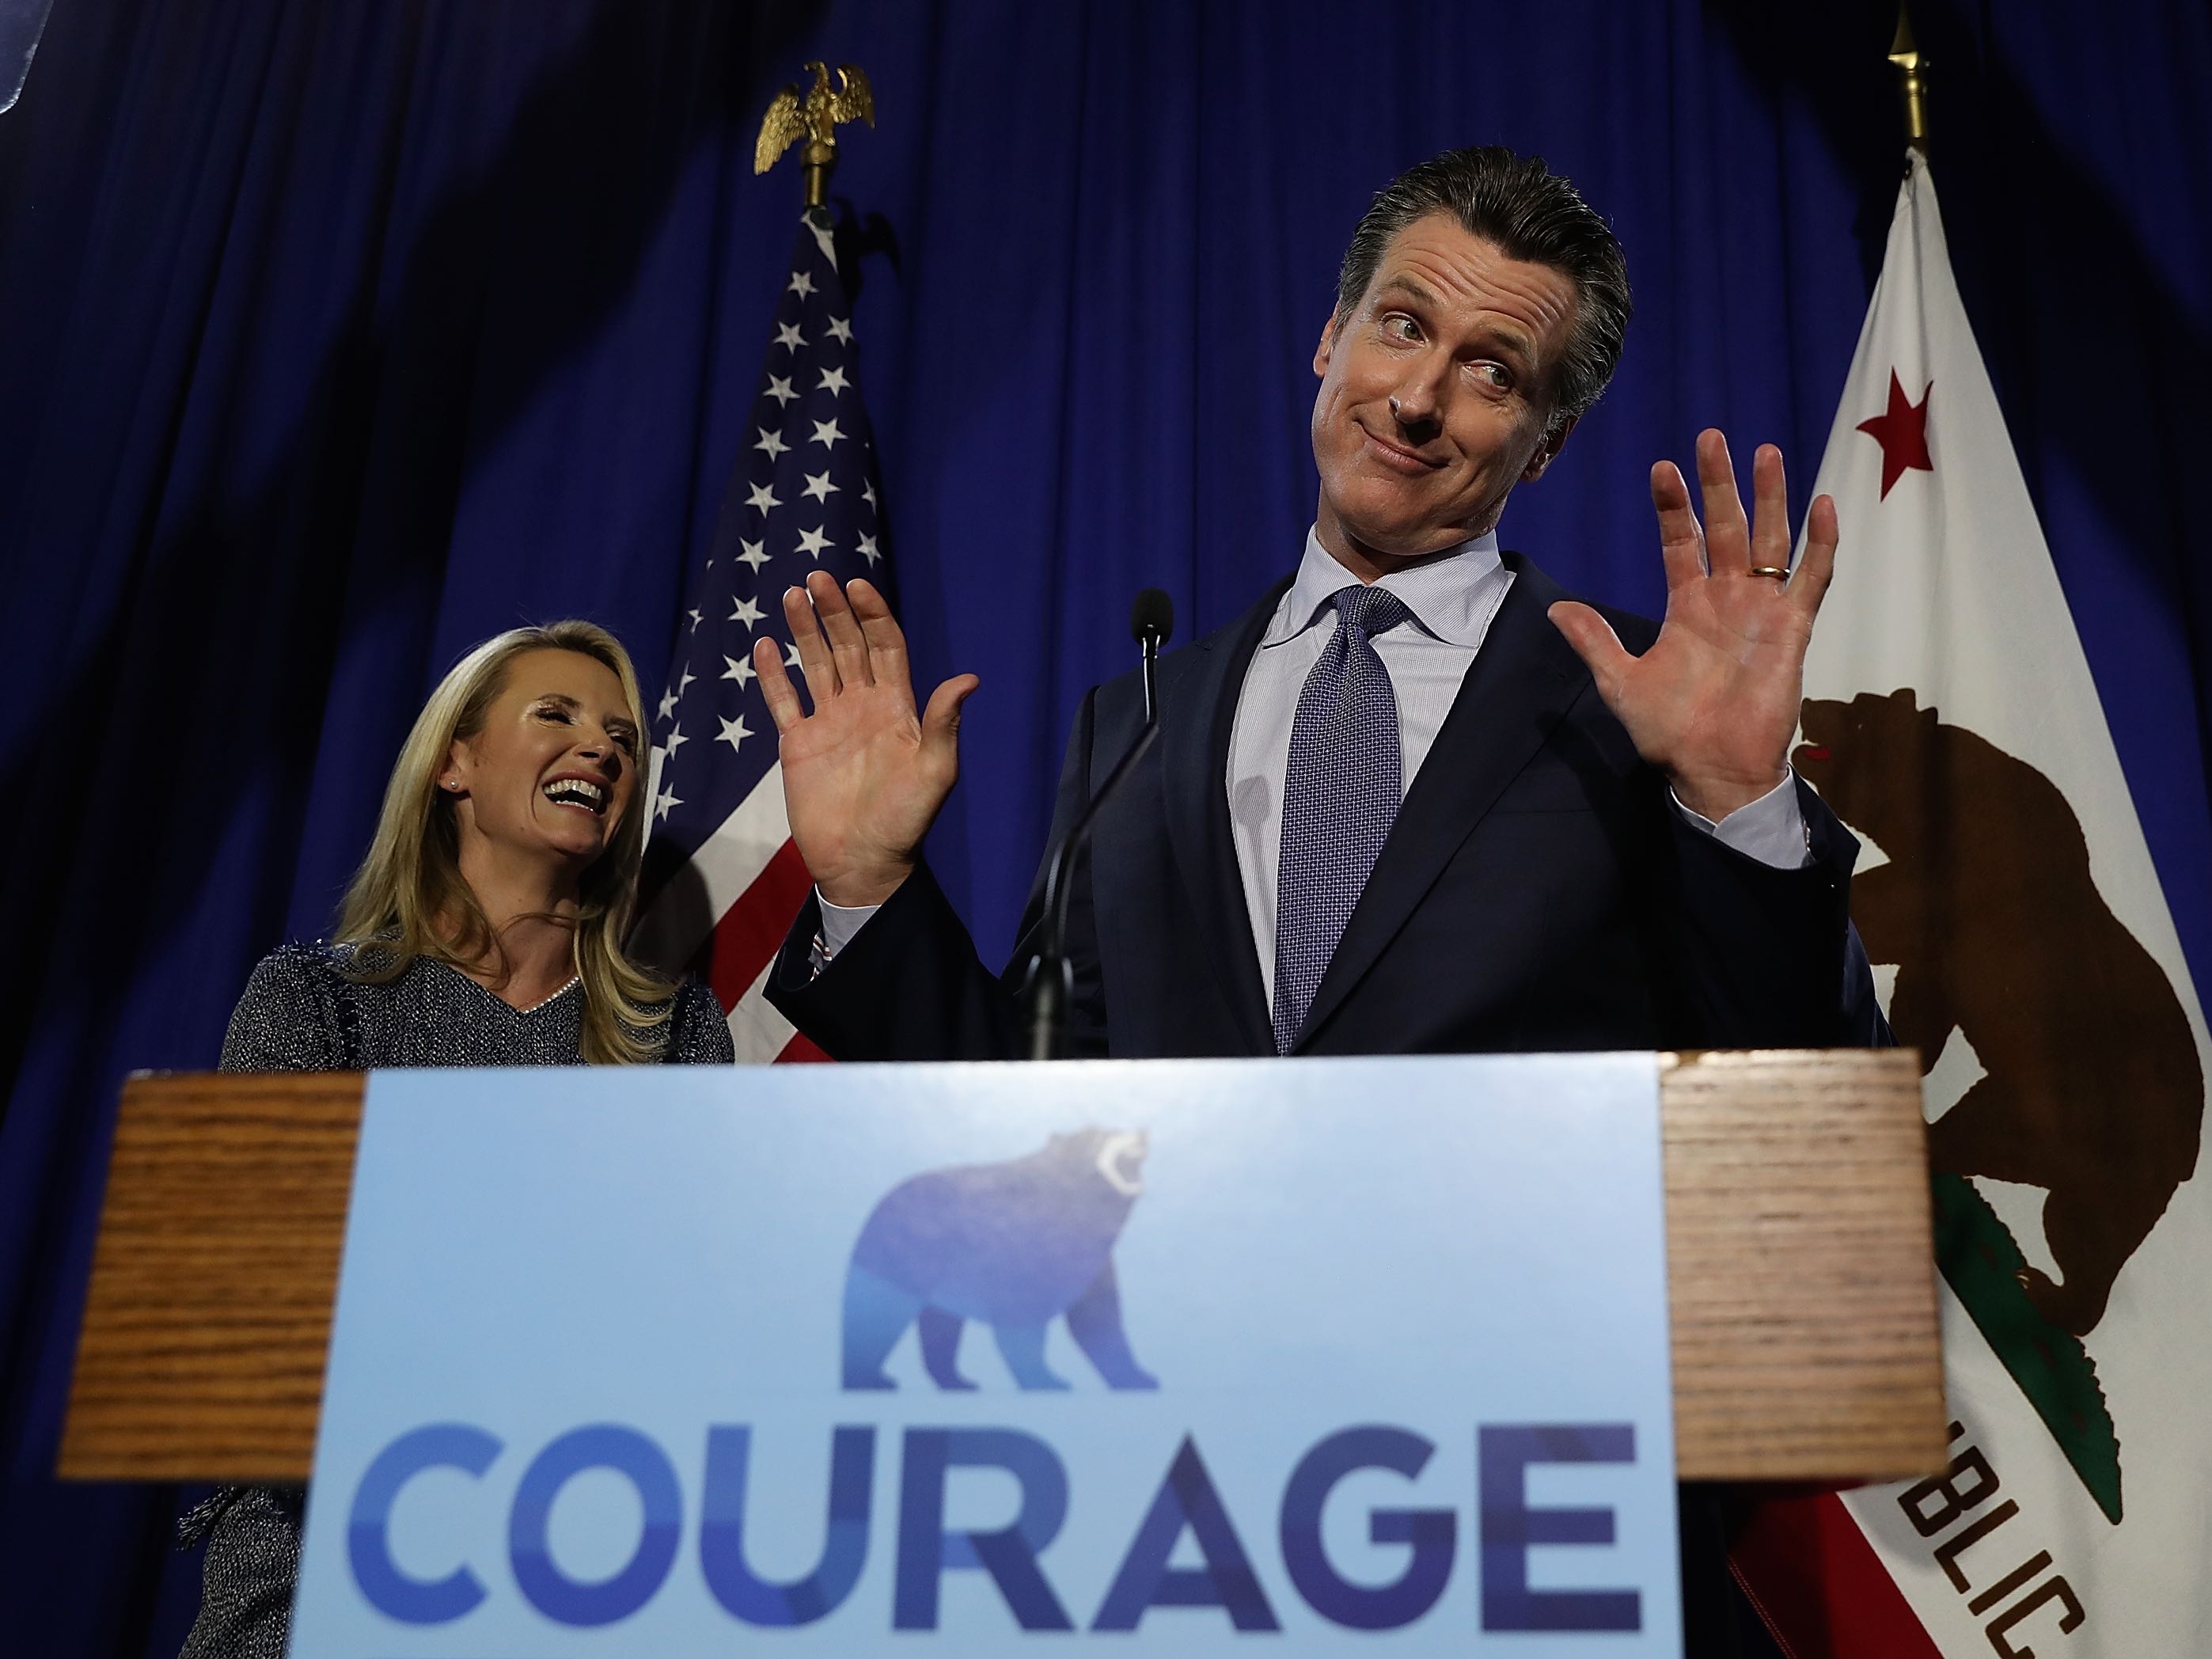 Gavin Newsom Backtracks: Open to Cash Reparations for Slavery, After All